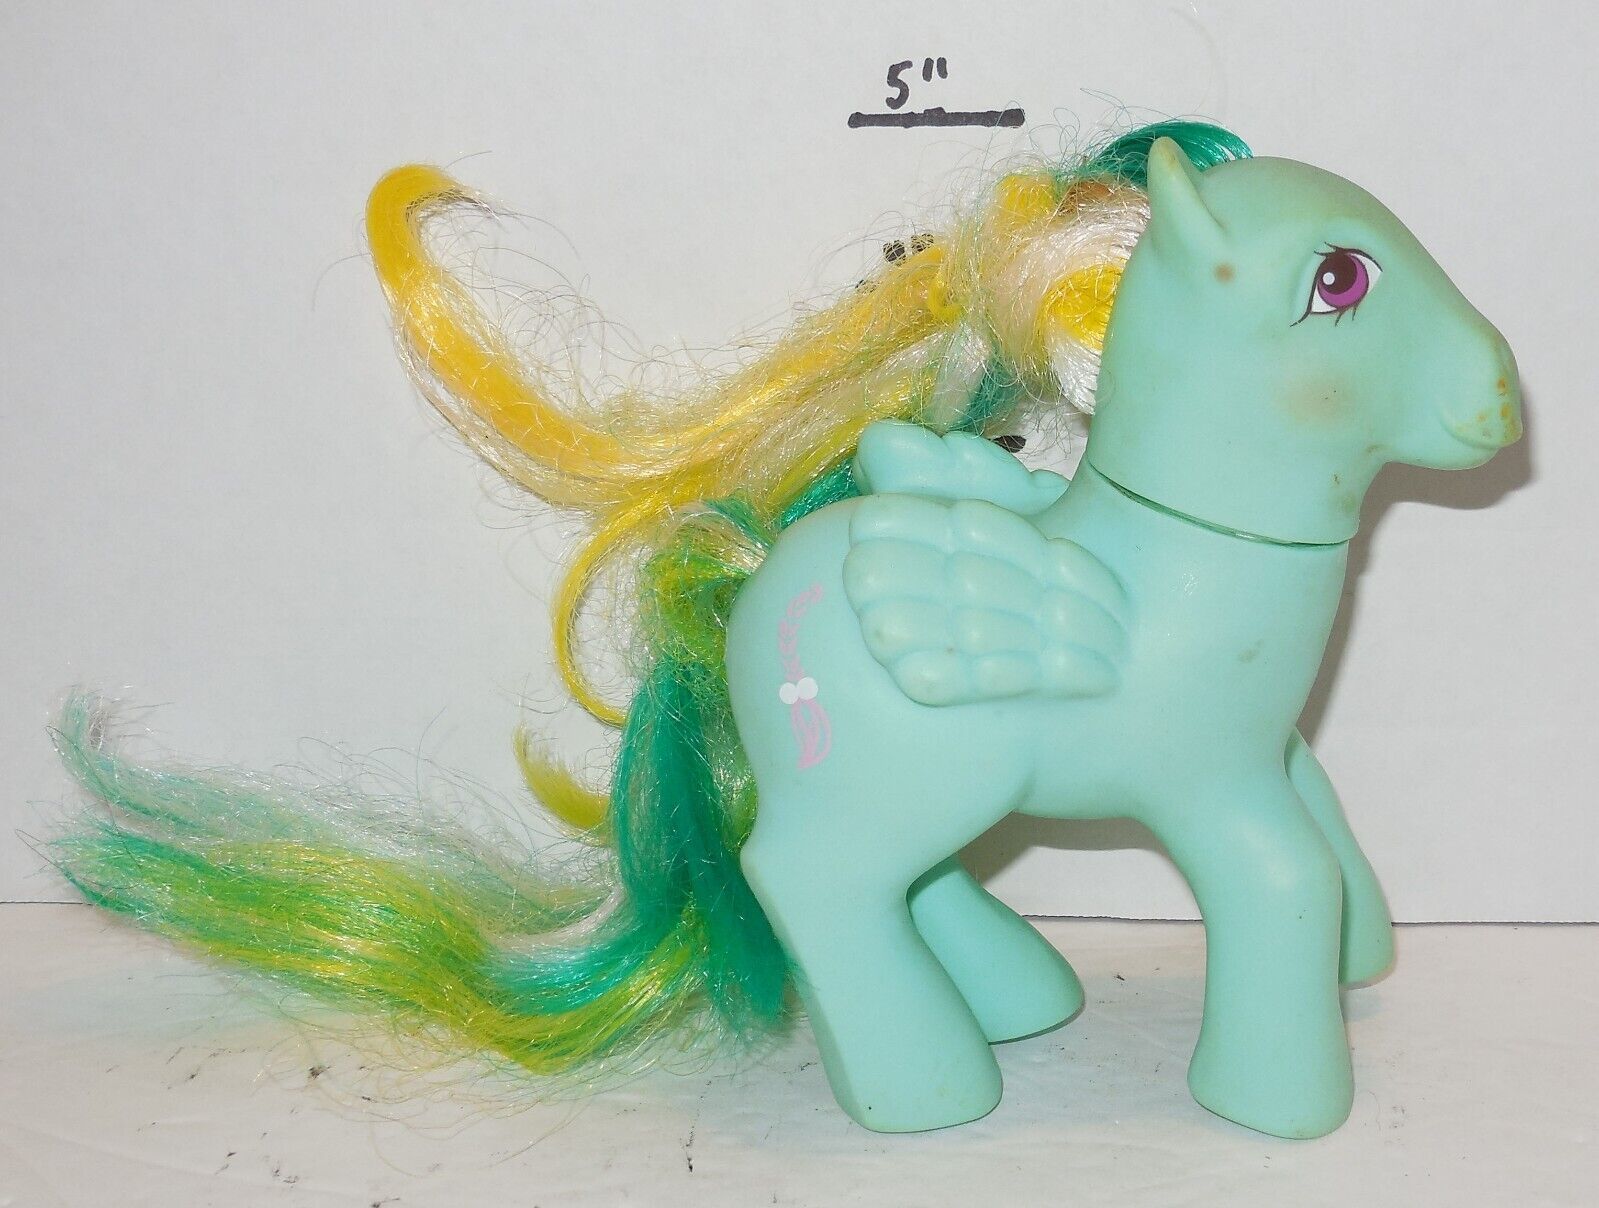 Primary image for 1985 Year 6 My Little Pony Braided Beauty Brush N Grow Pegasus G1 MLP Hasbro